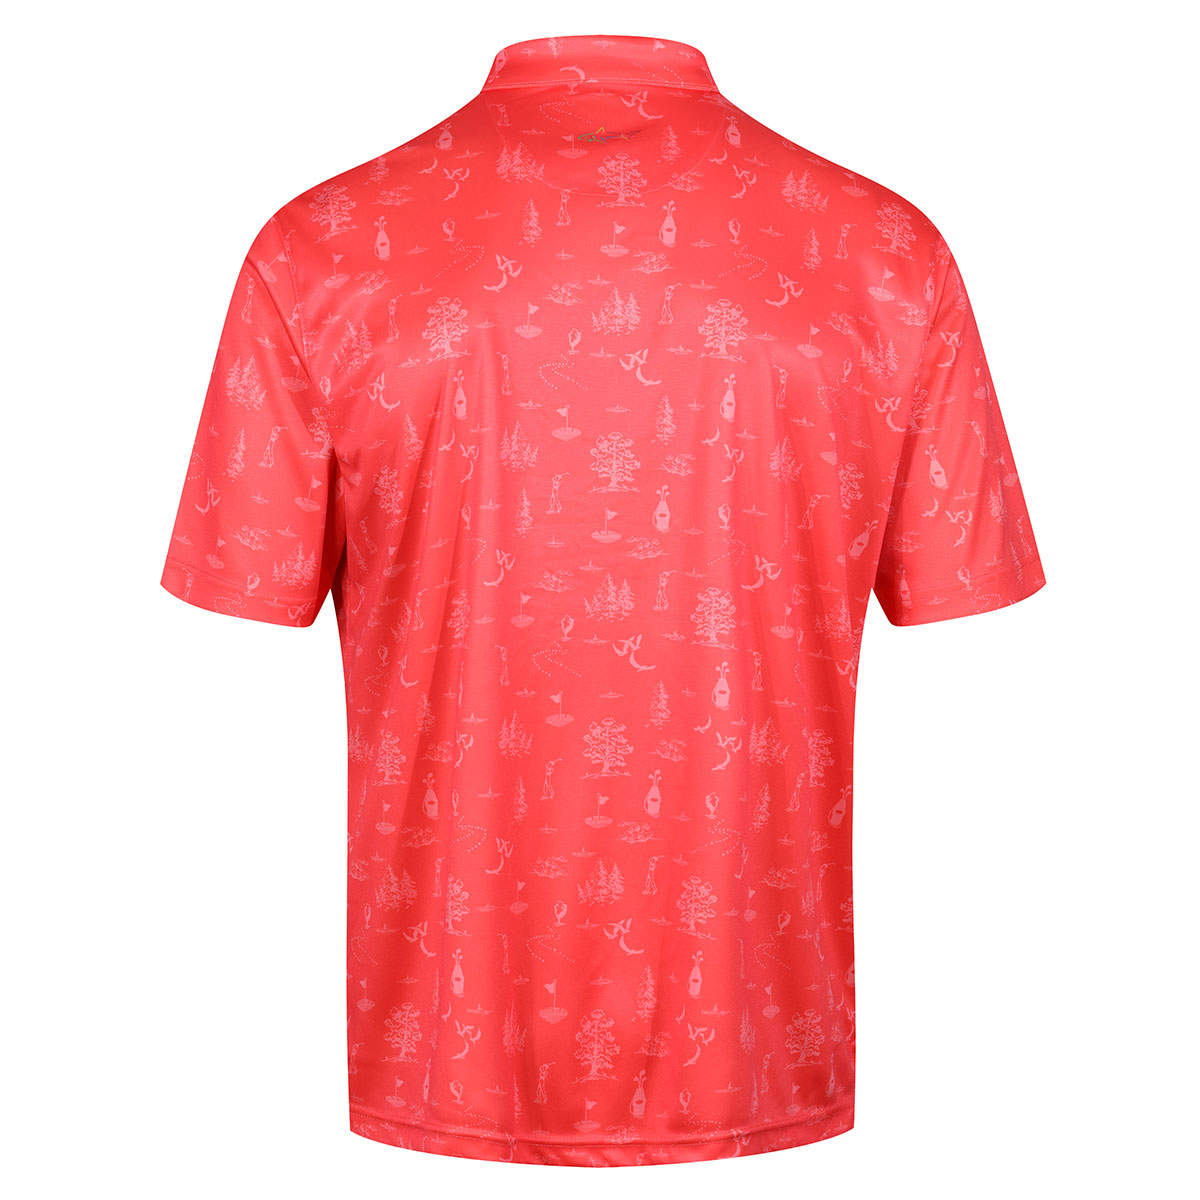 Greg Norman Men's Toile Print Golf Polo Shirt from american golf